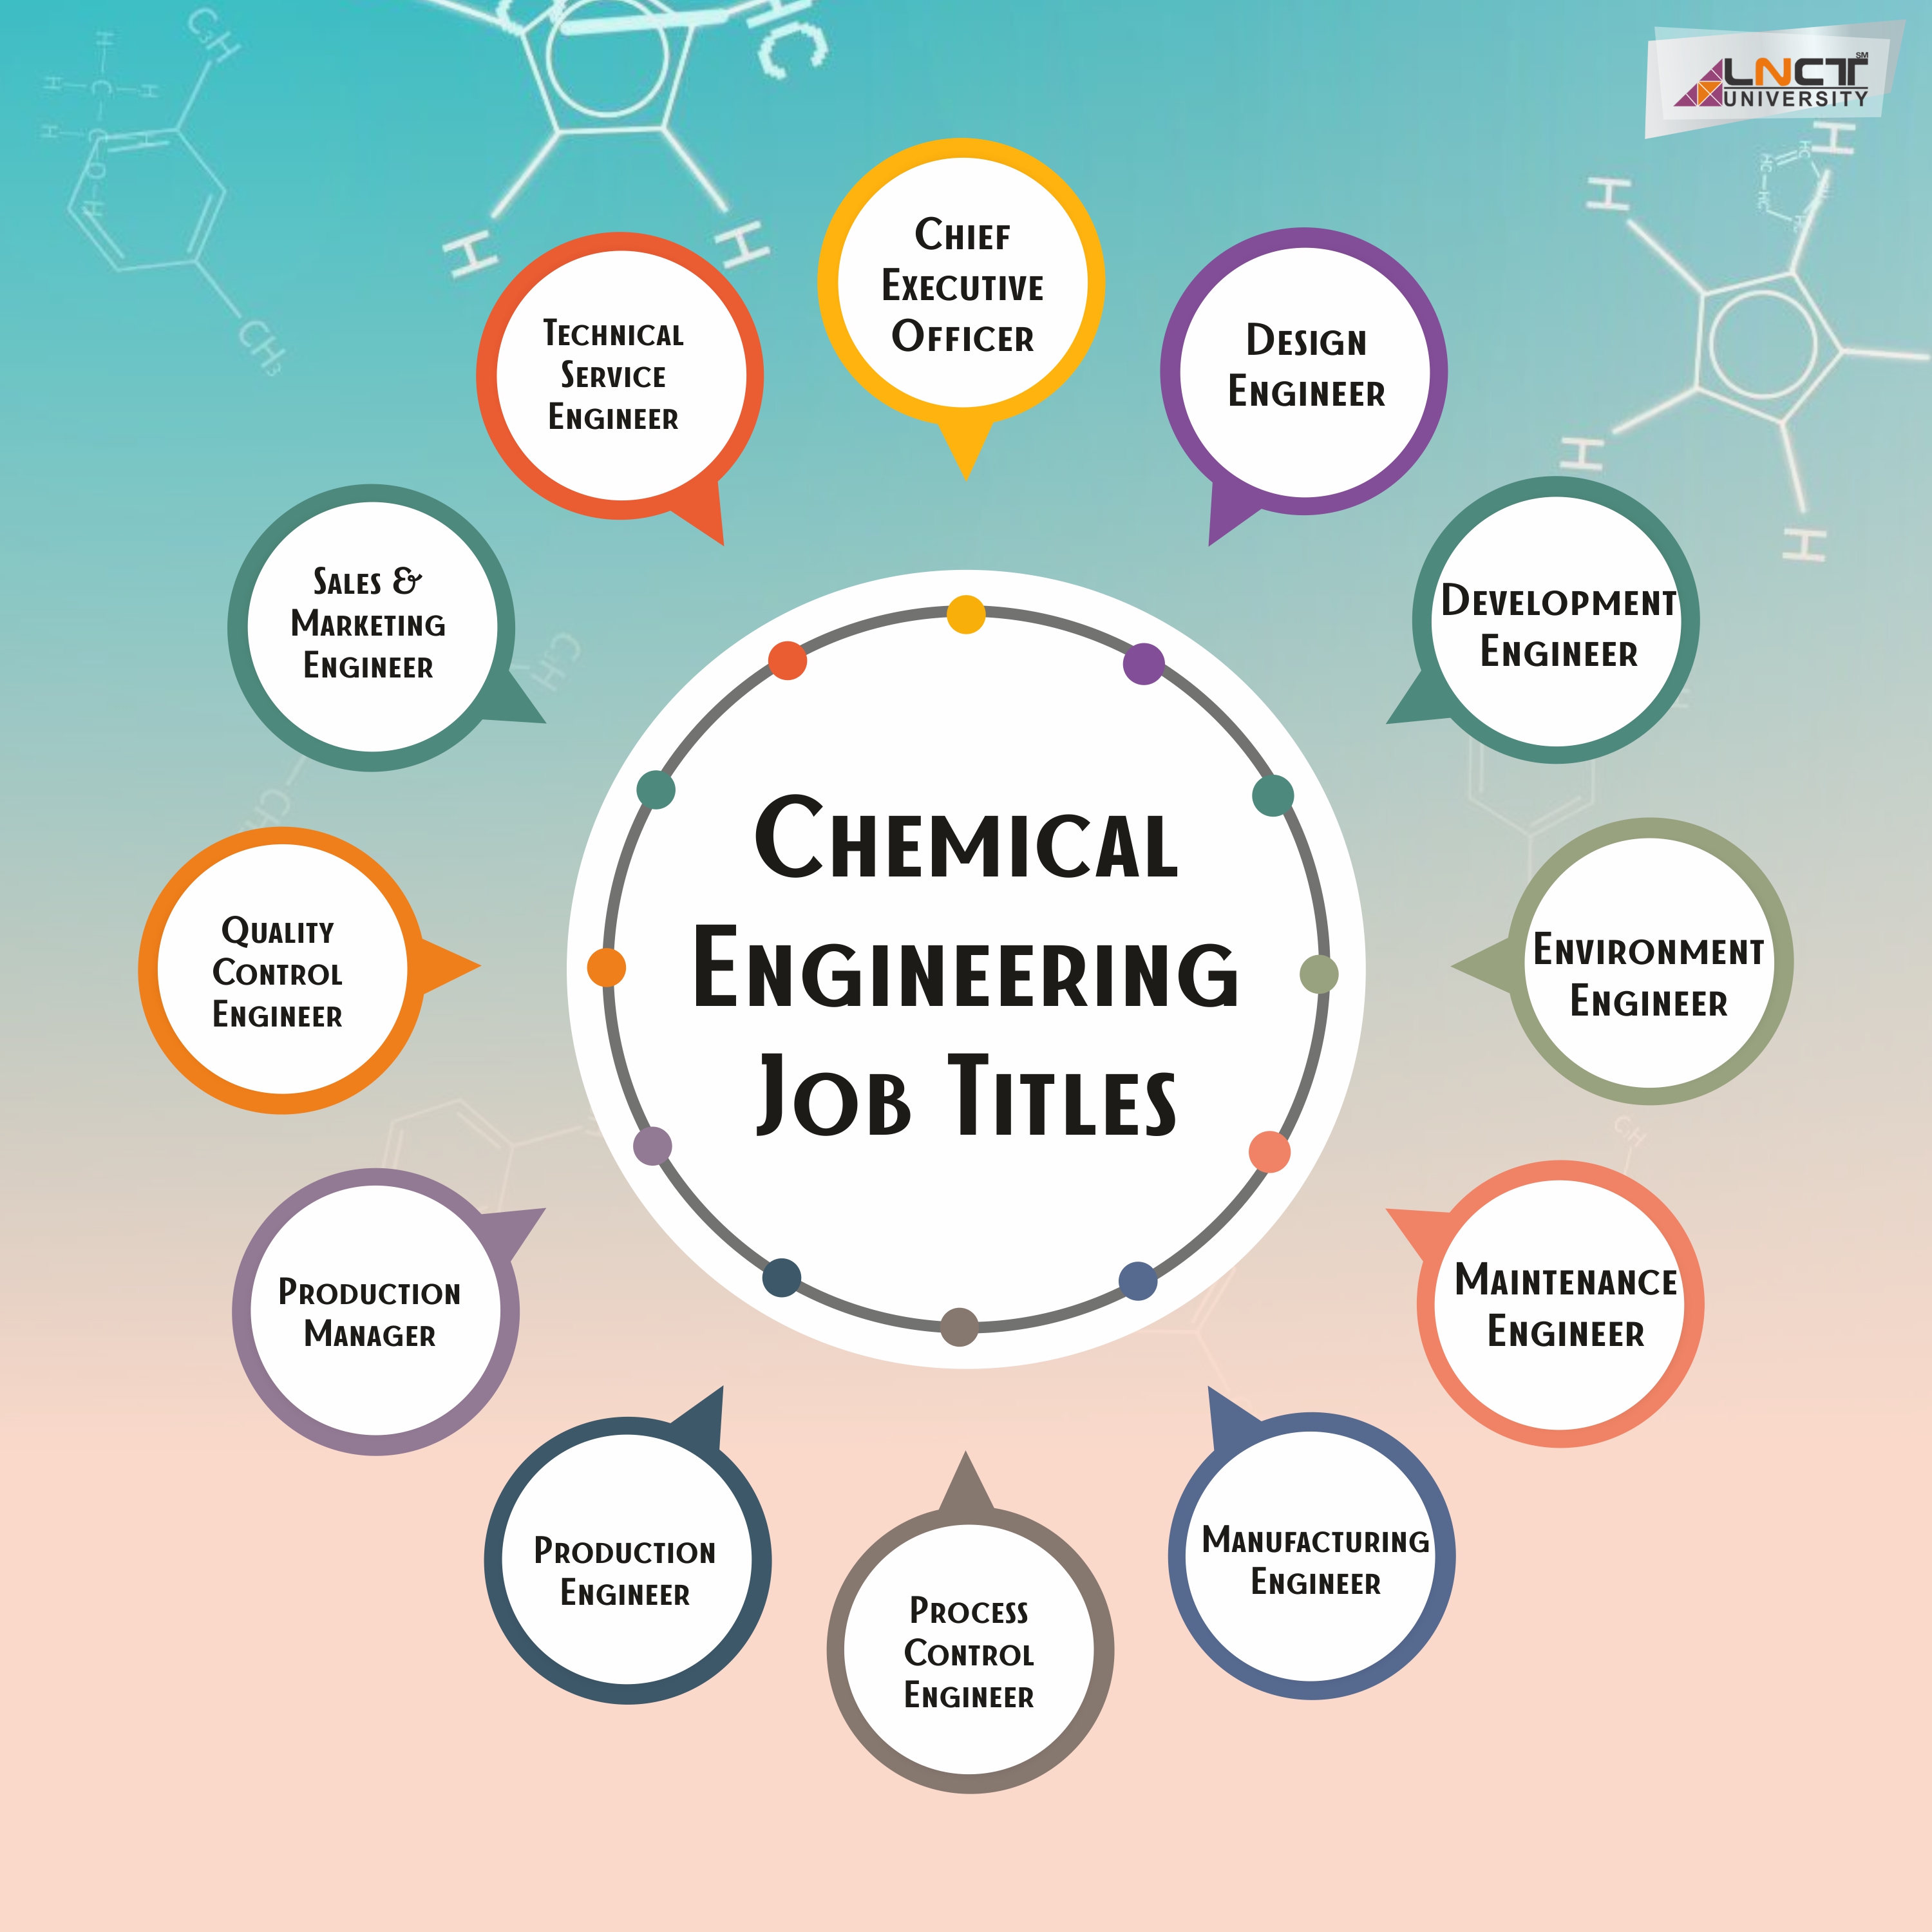 Chemical engineering job qualifications